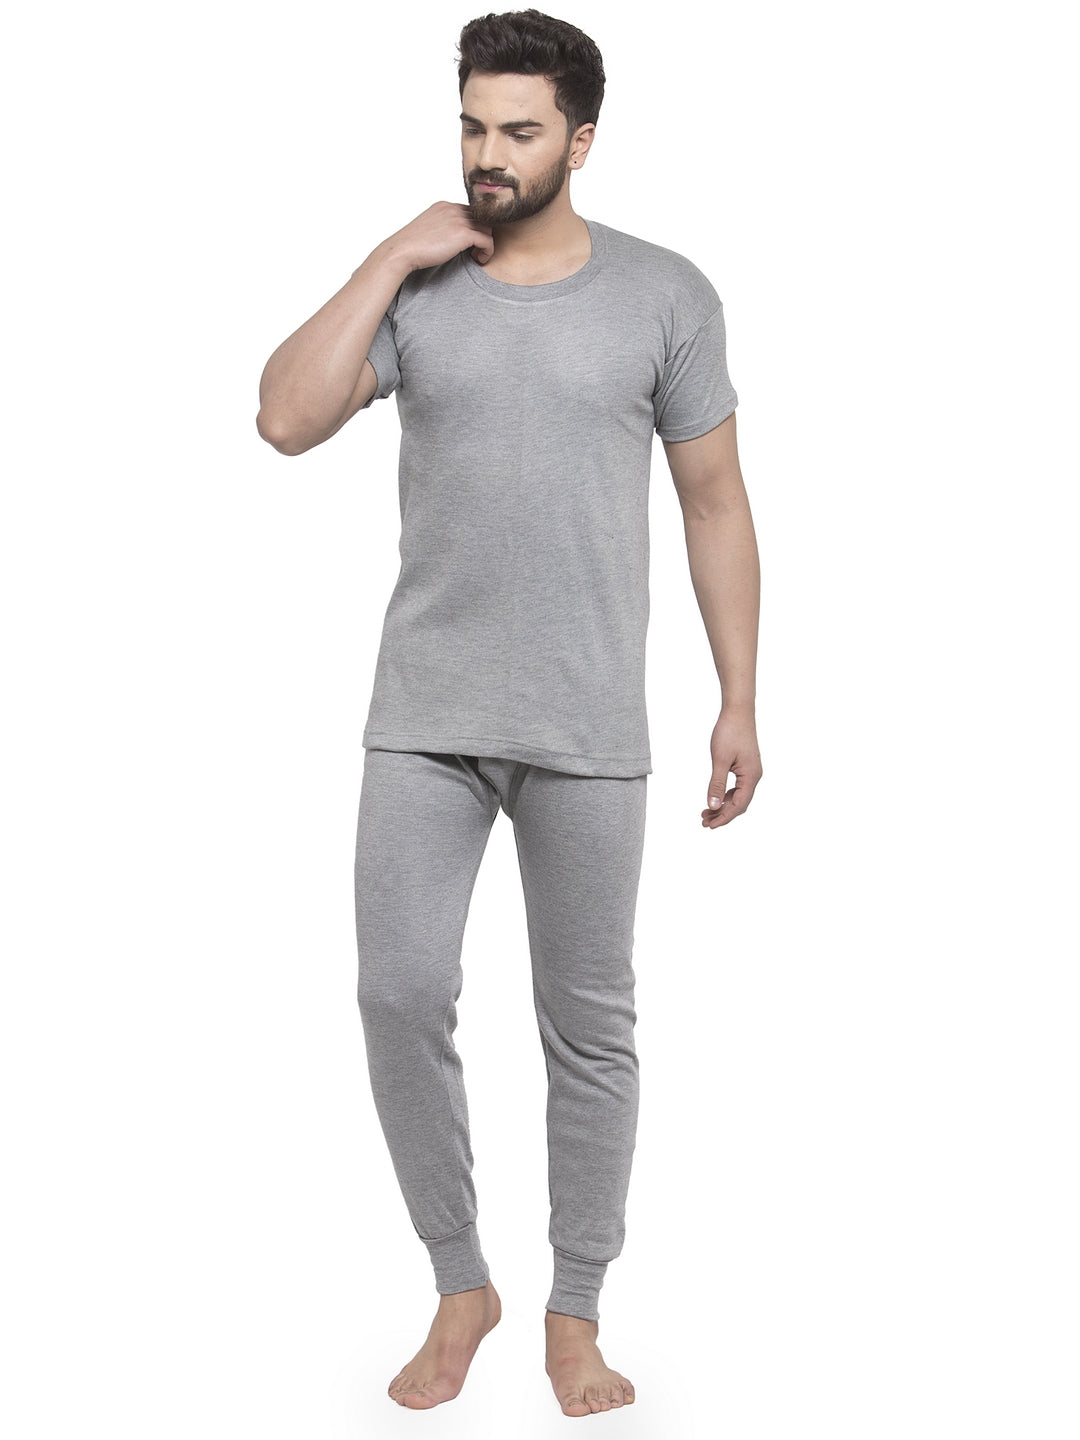 MEN'S HALF SLEEVES THERMAL SET ( ROUND NECK VEST AND TROUSER)